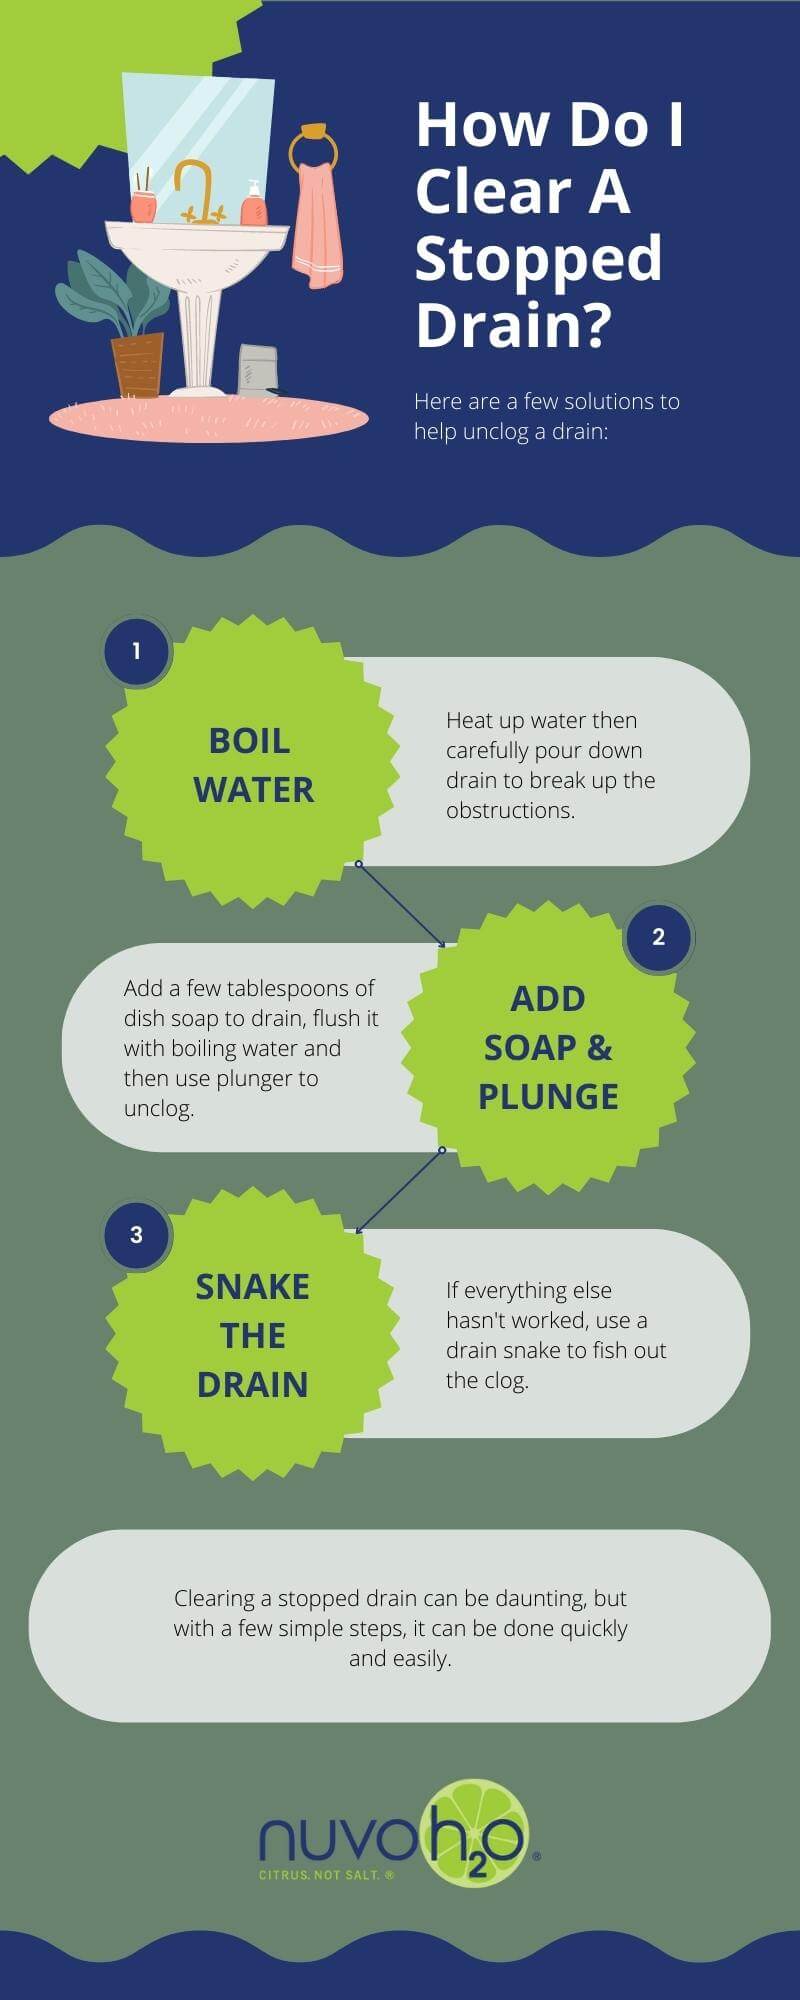 https://nuvoh2o.com/product_images/uploaded_images/how-do-i-clear-a-stopped-drain-infographic-1-.jpg